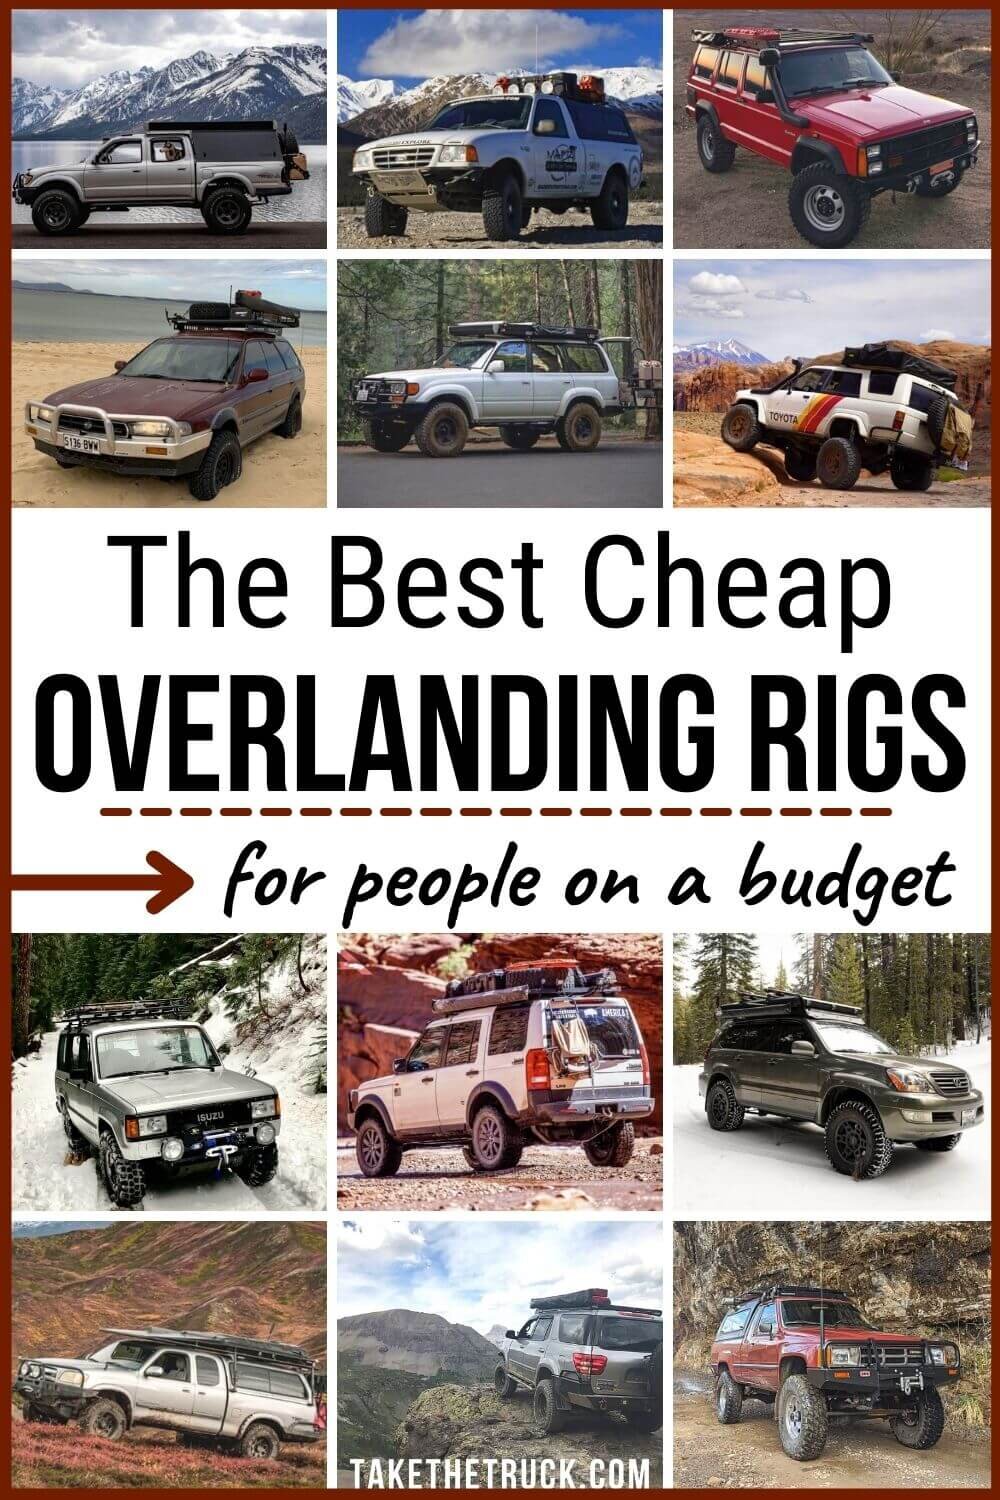 15 budget overland vehicle recommendations if you’re overlanding on a budget. Cheap overland vehicles with great budget overland build ideas to help you start your overlanding adventures today!